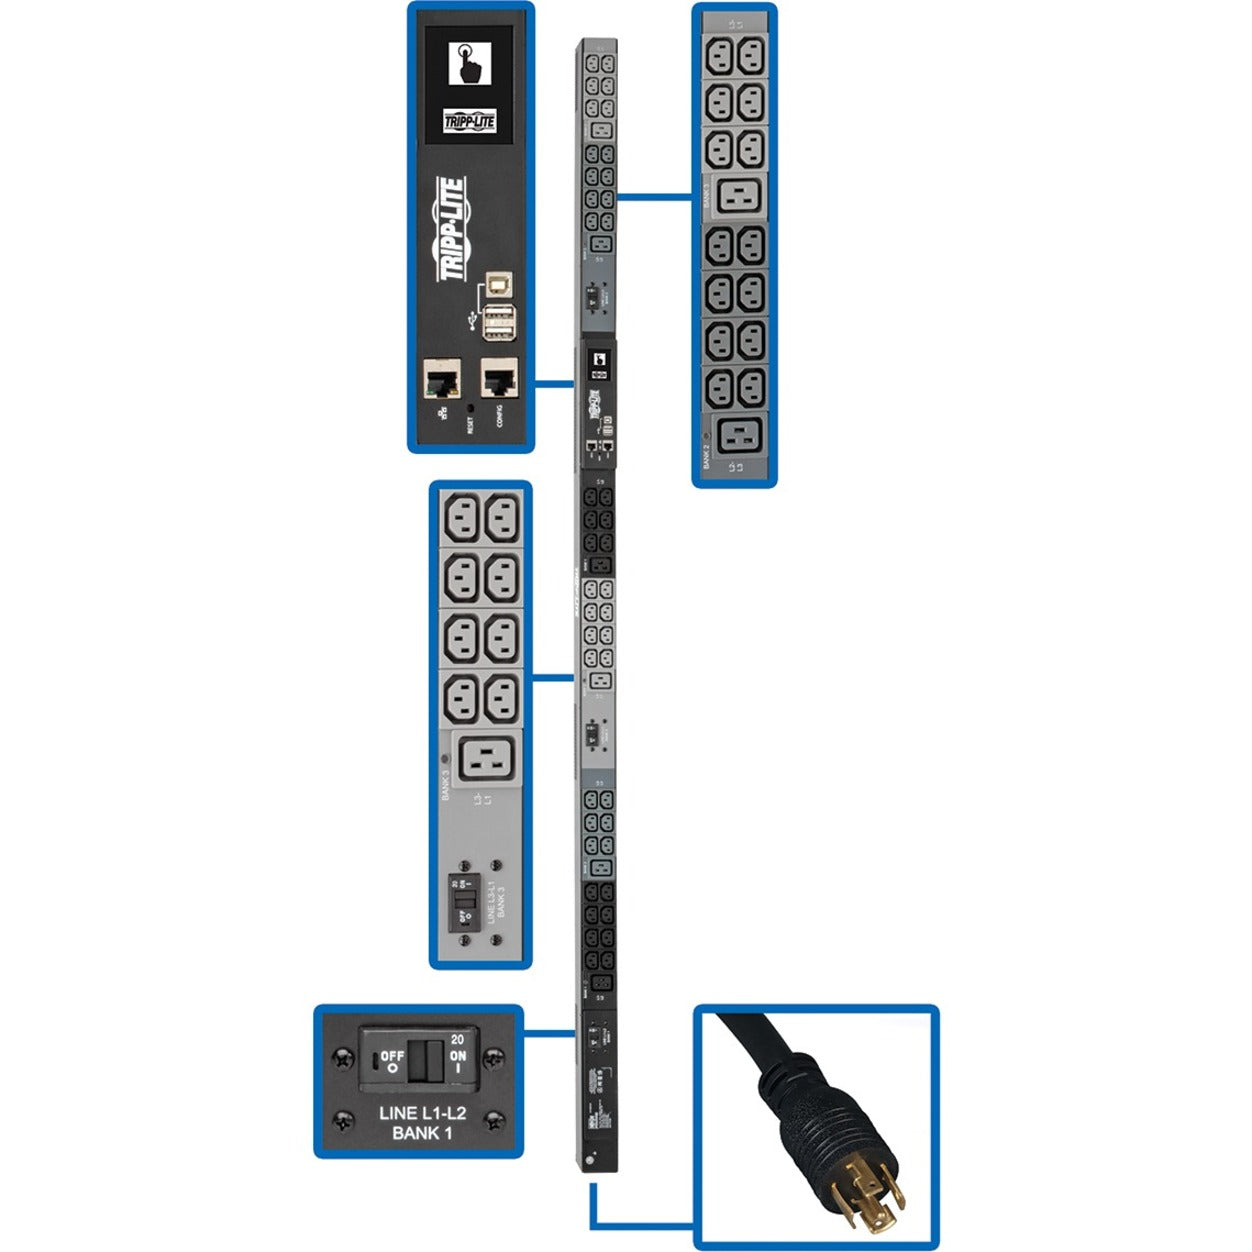 Tripp Lite PDU3EVN10L2130B 48-Outlet PDU, 10 kW Power Rating, Monitored, Three Phase